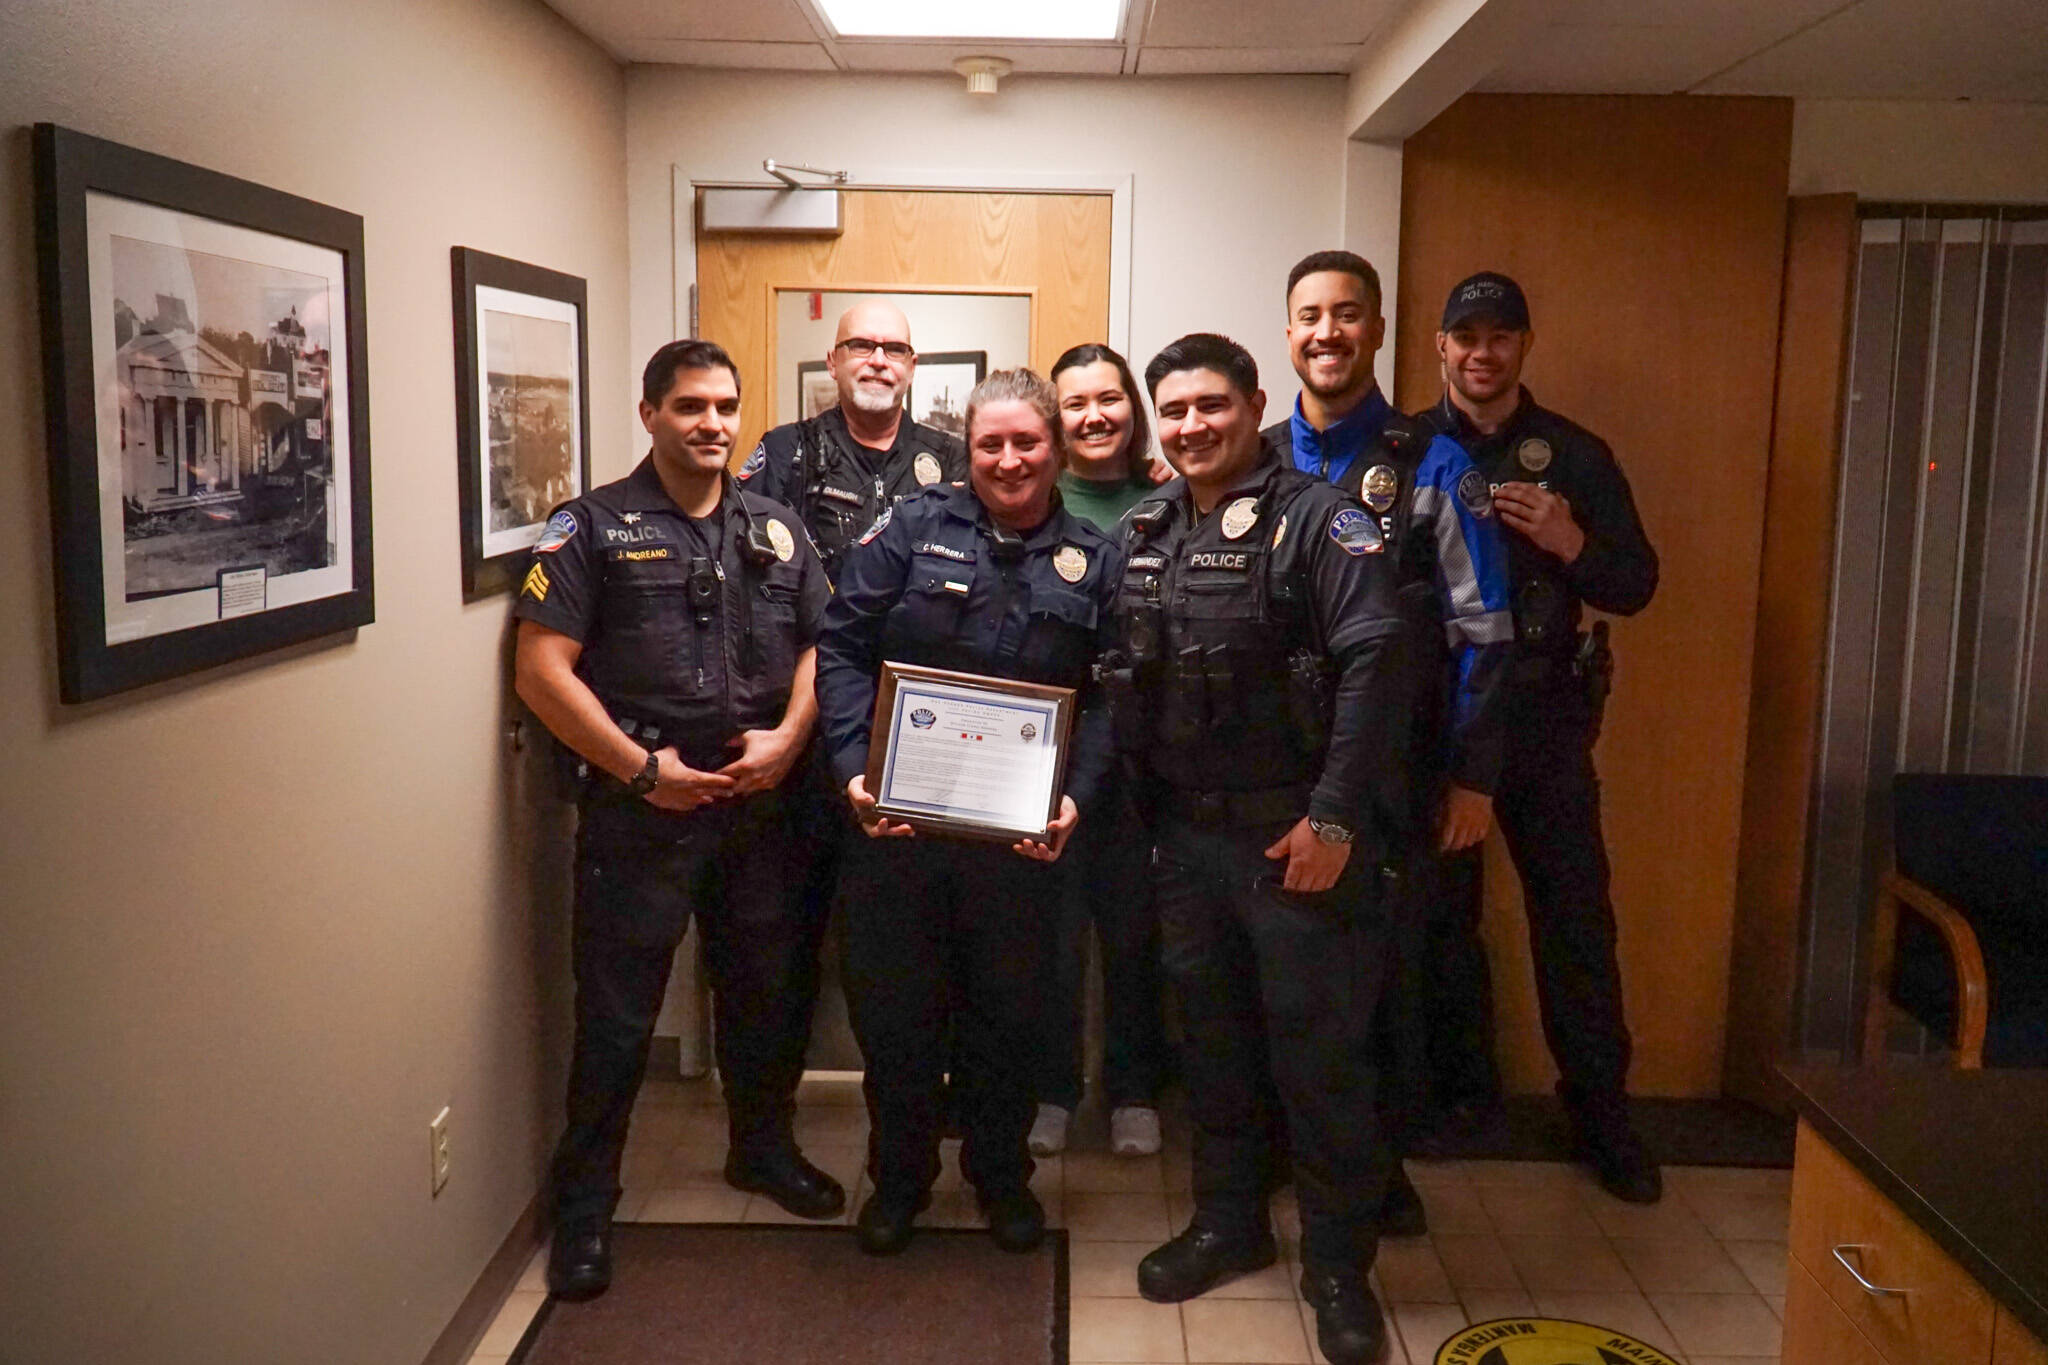 Members of the Oak Harbor police department show support to Officer Claire Herrera (middle), who earned the life saving award on Monday.